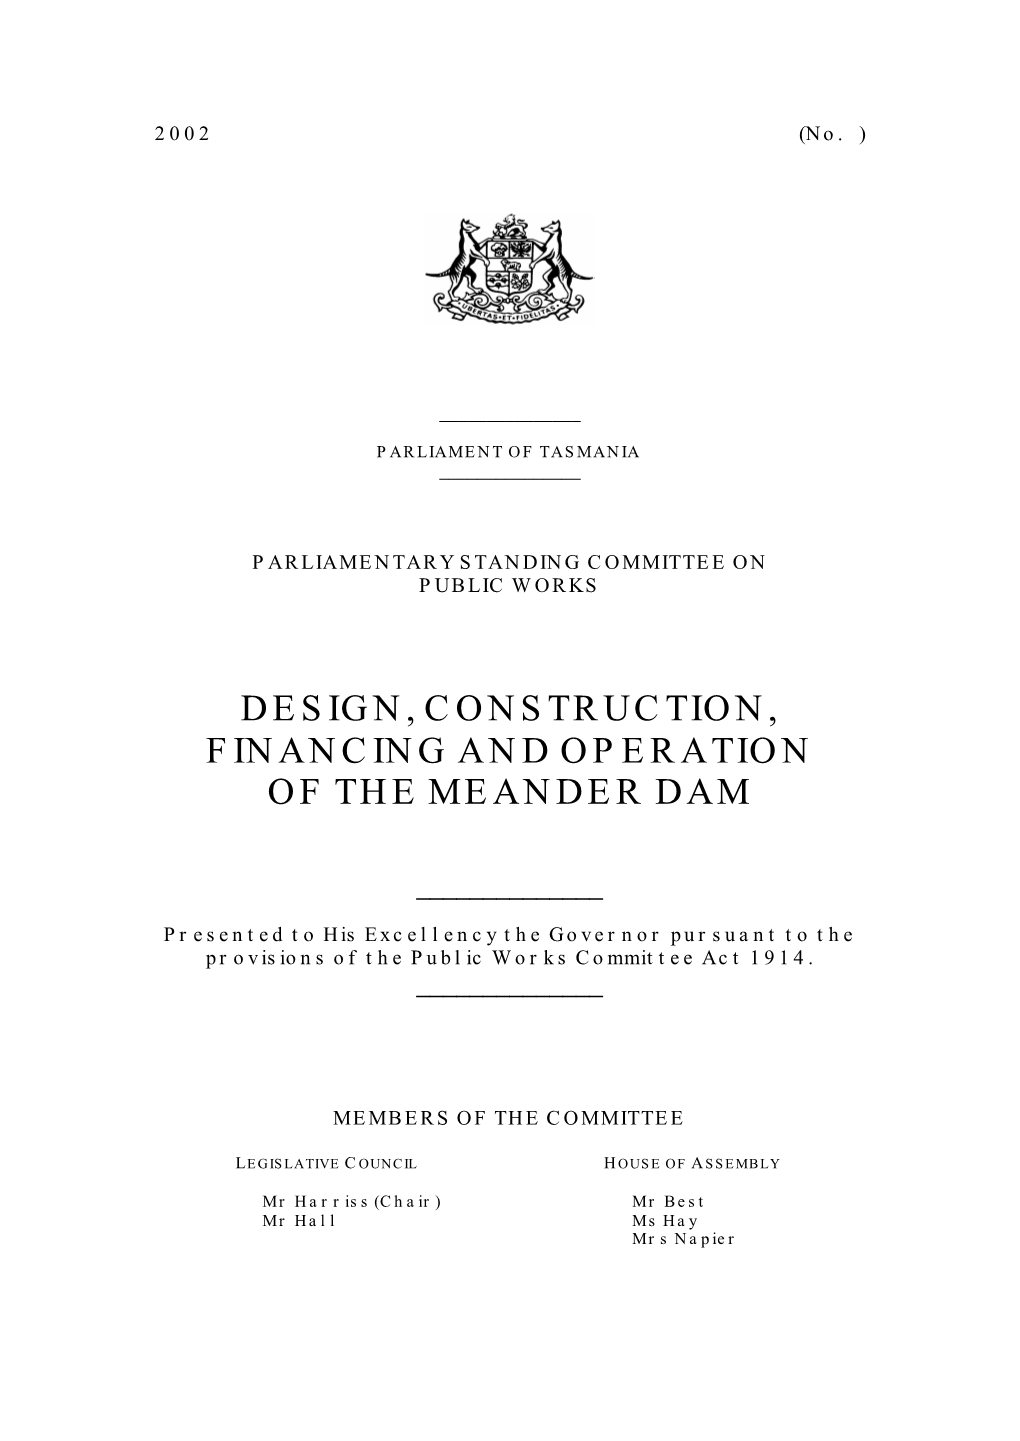 Design,Construction, Financing and Operation of the Meander